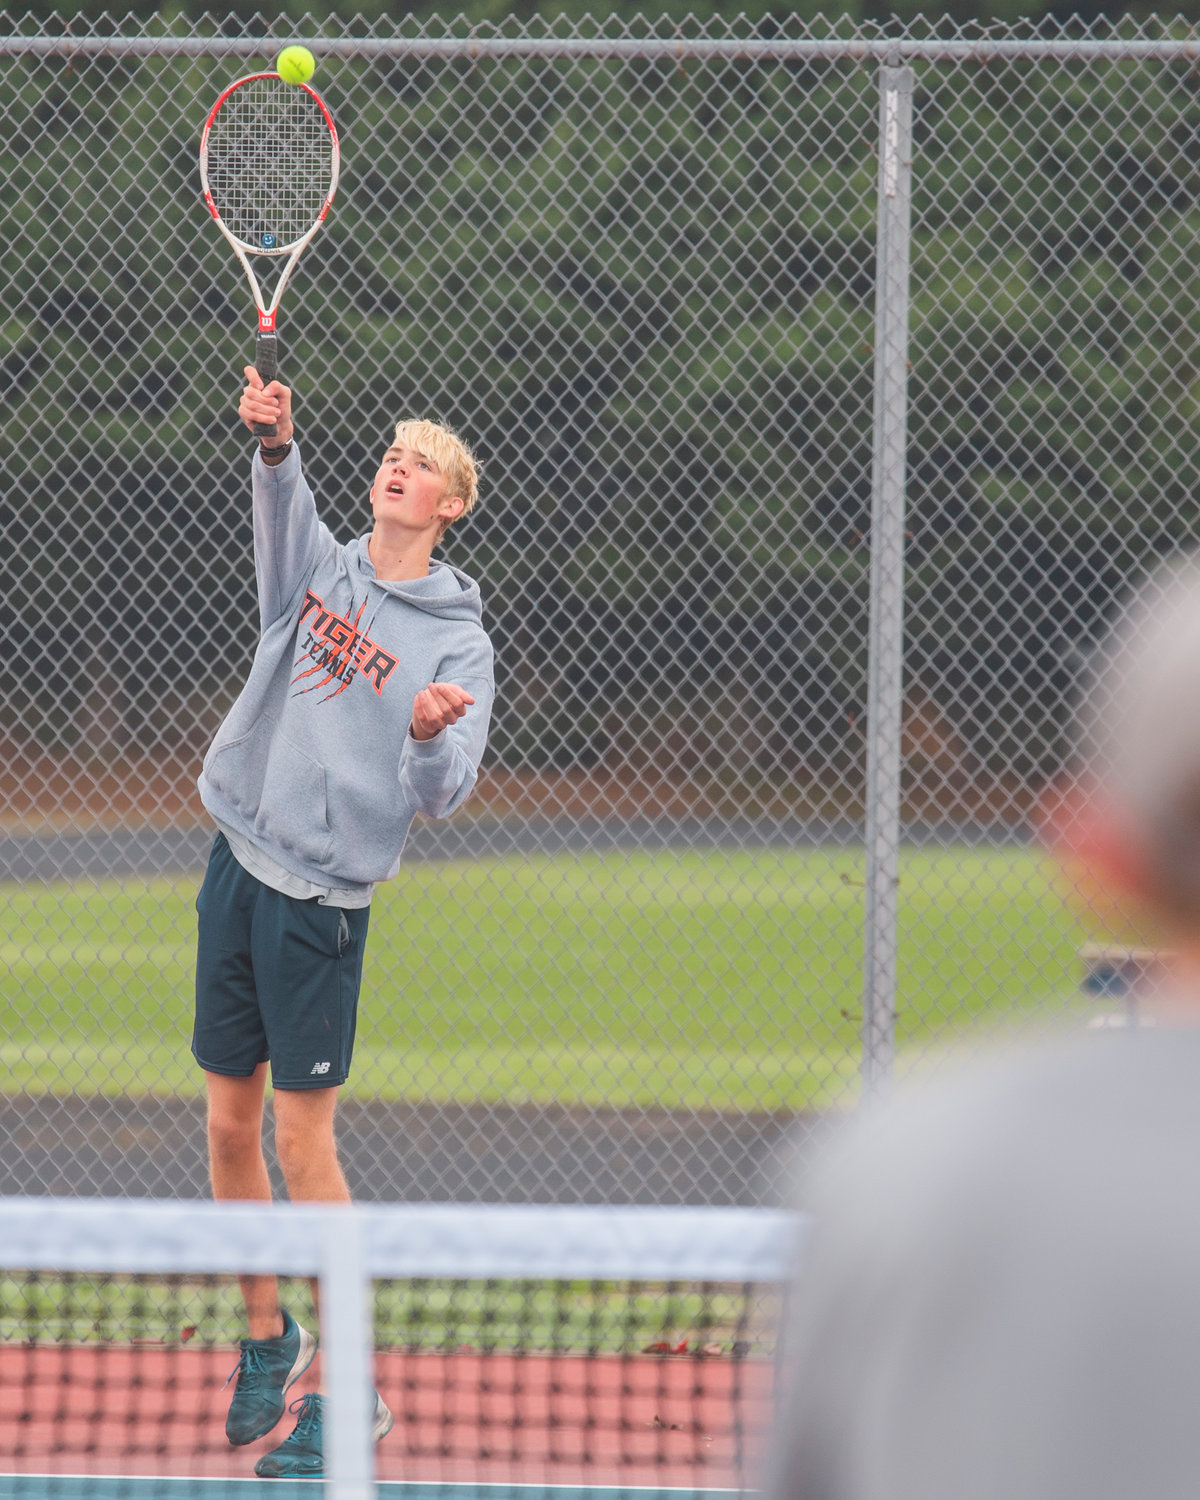 Centralia’s Jacoby Corwin serves up a shot during a doubles match at Black Hills High School Tuesday afternoon.